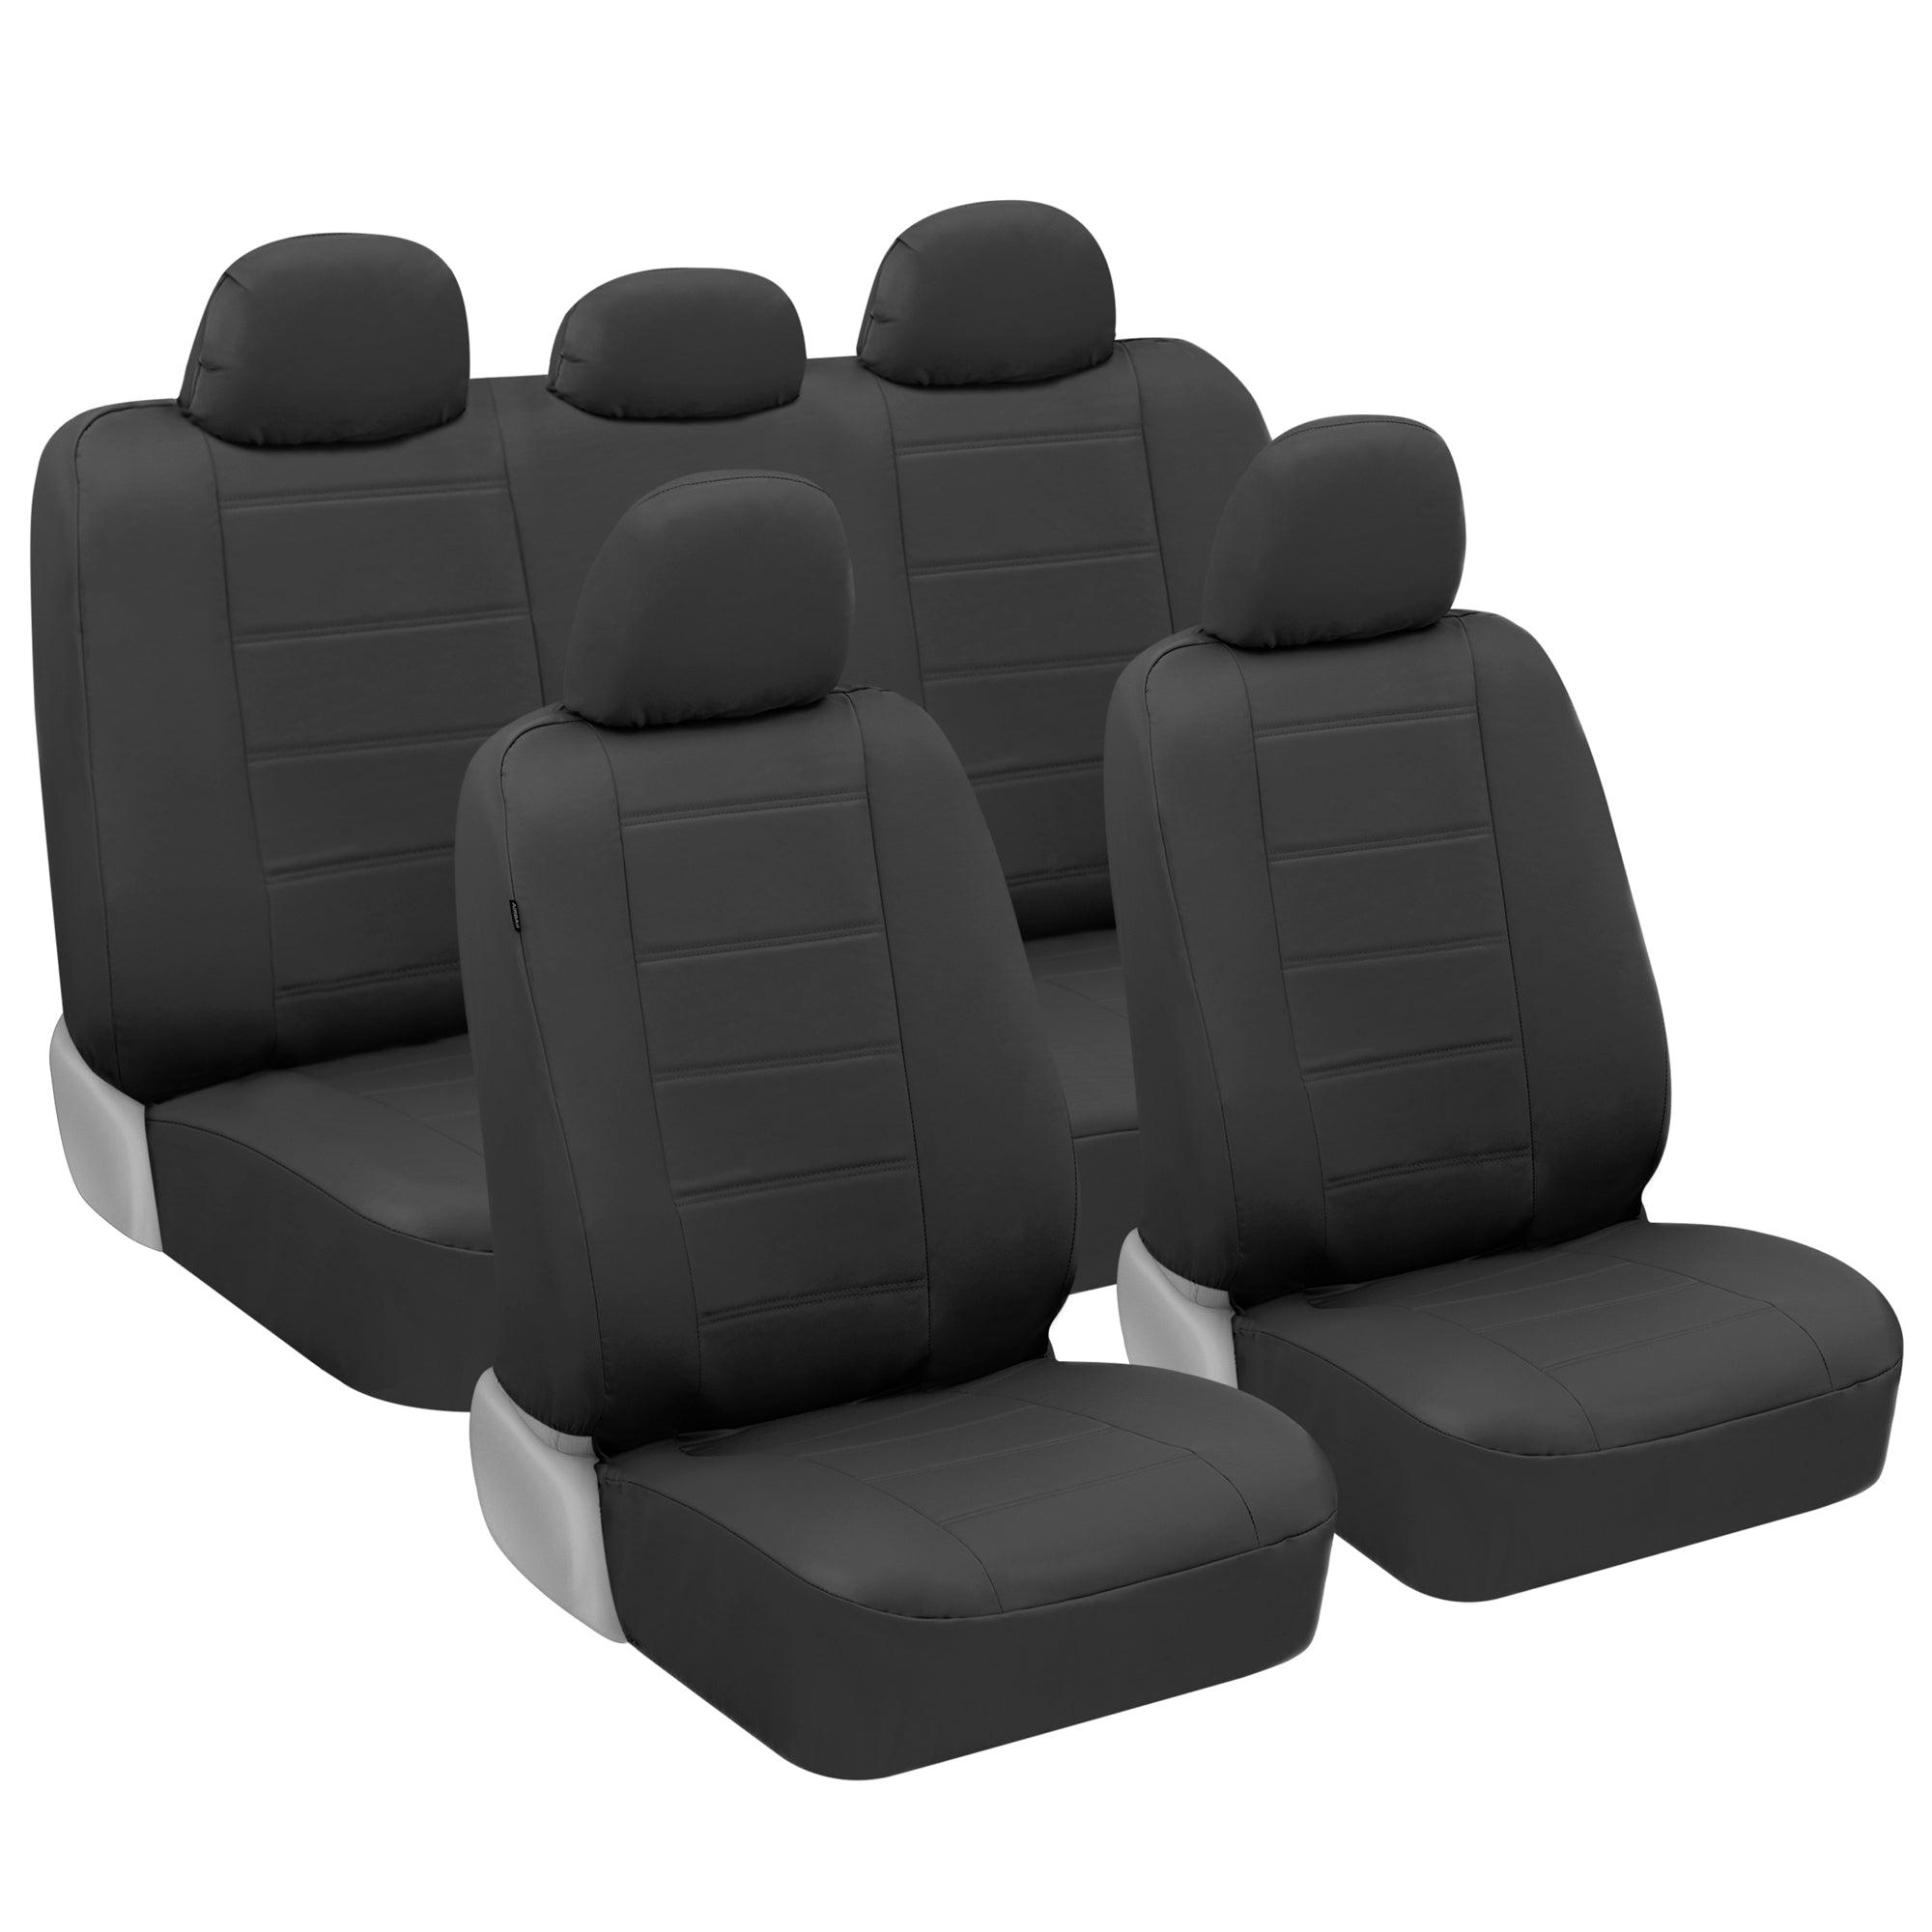 carXS Black Leather Car Seat Covers Full Set, 9-Piece Faux Leather Seat Covers for Cars, Includes Front Seat Covers and Back Car Seat Cover, Automotive Seat Covers for Trucks SUV